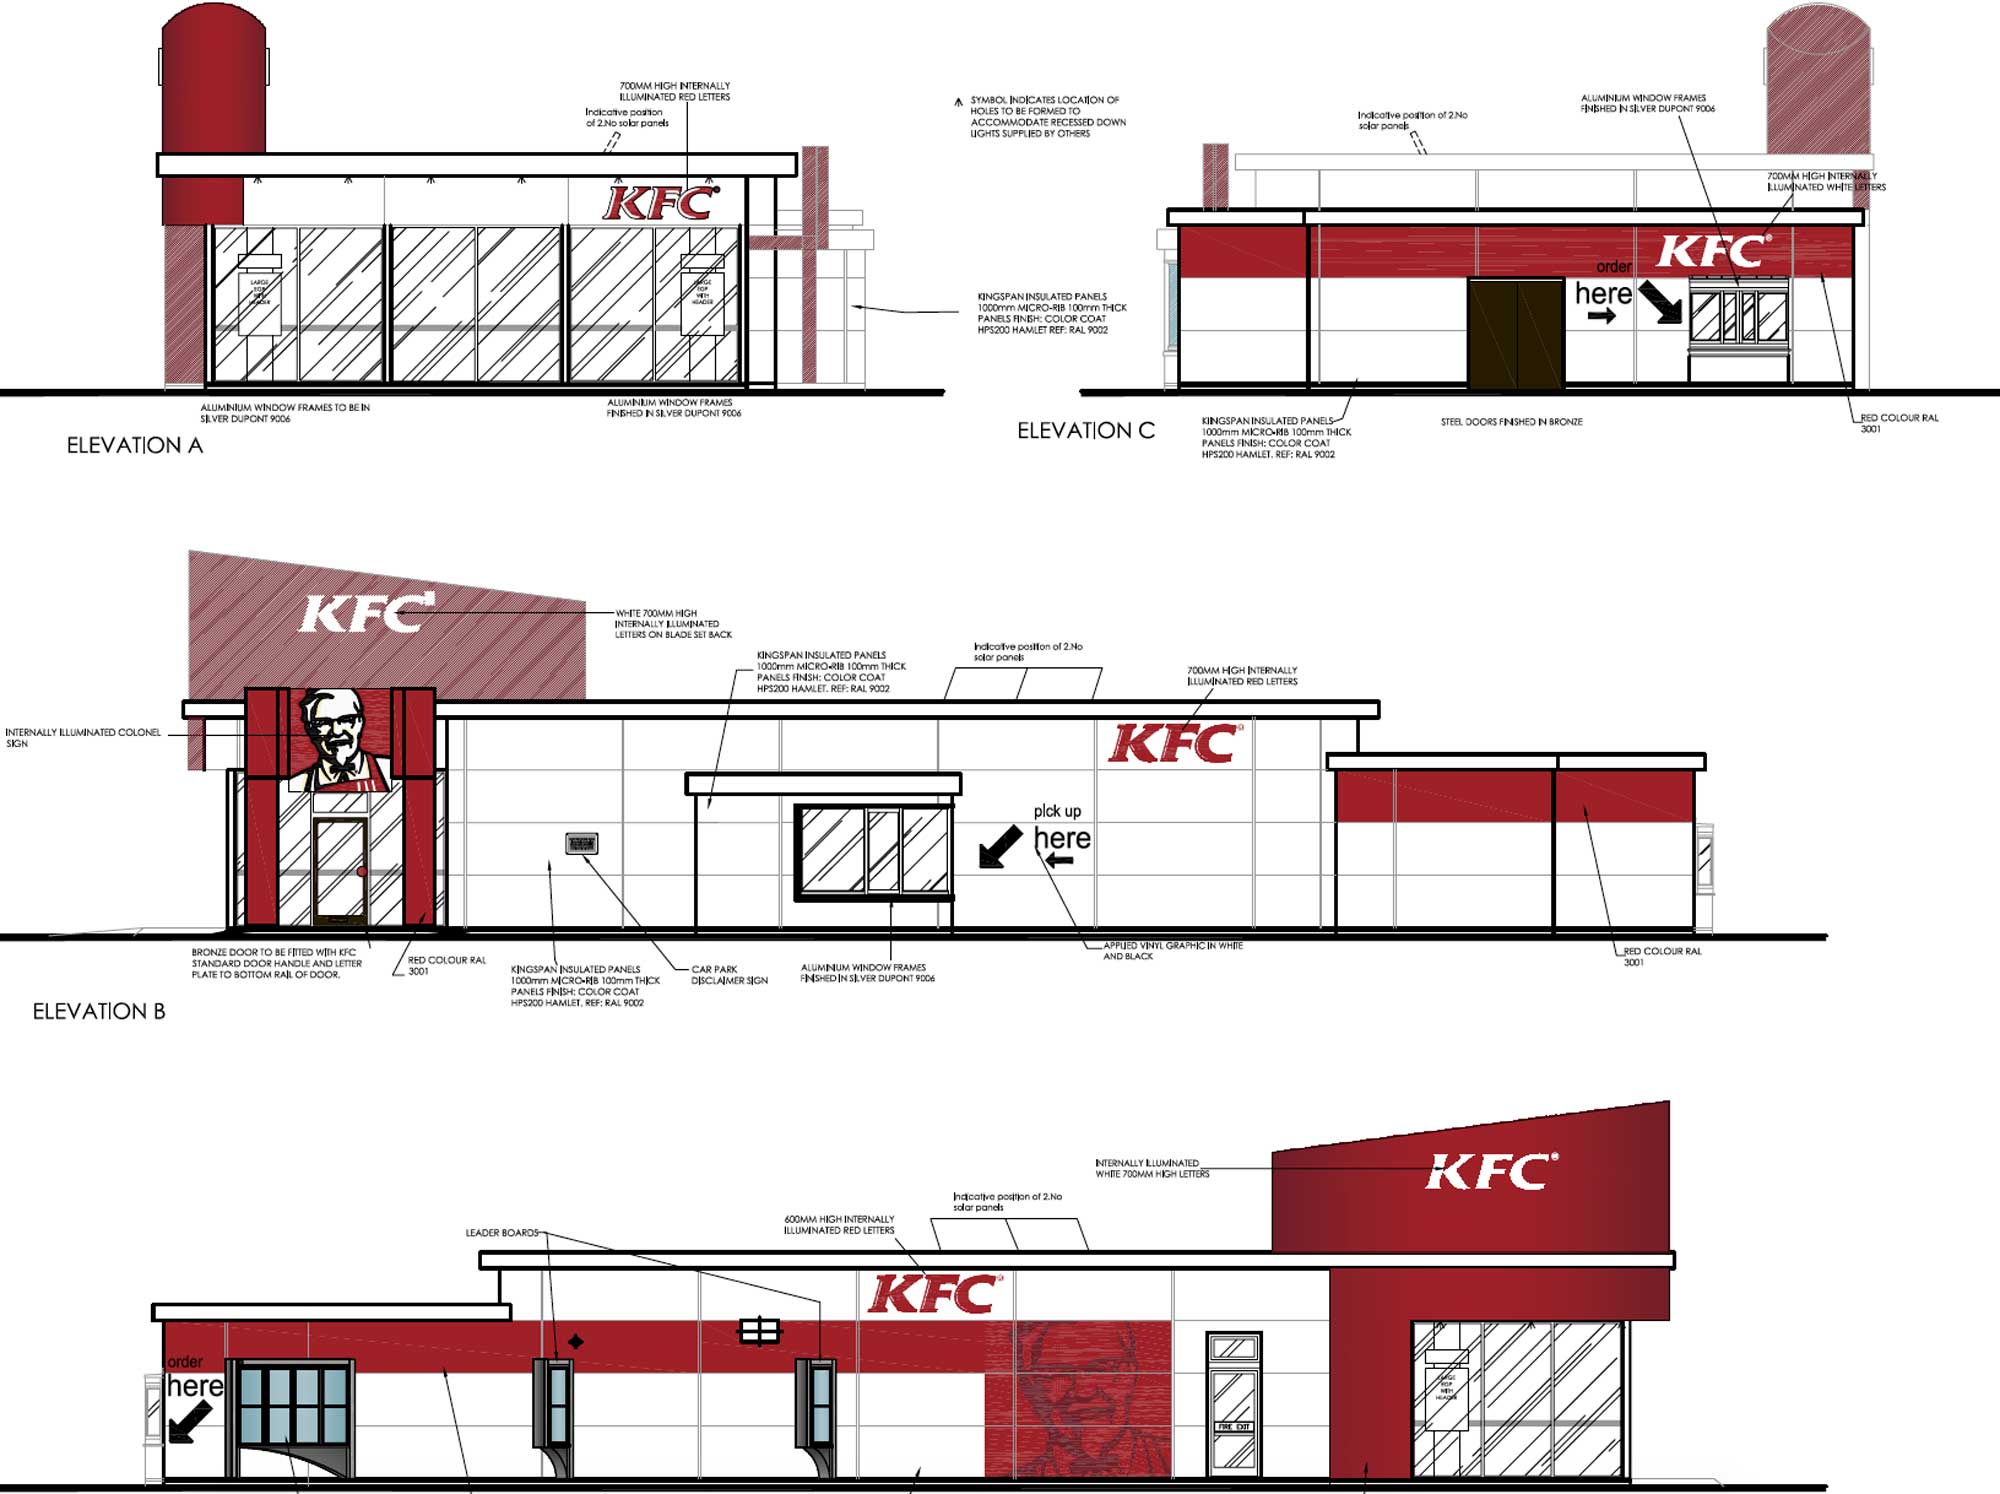 Technical line drawing illustration showing various measurements and details of the new KFC restaurant